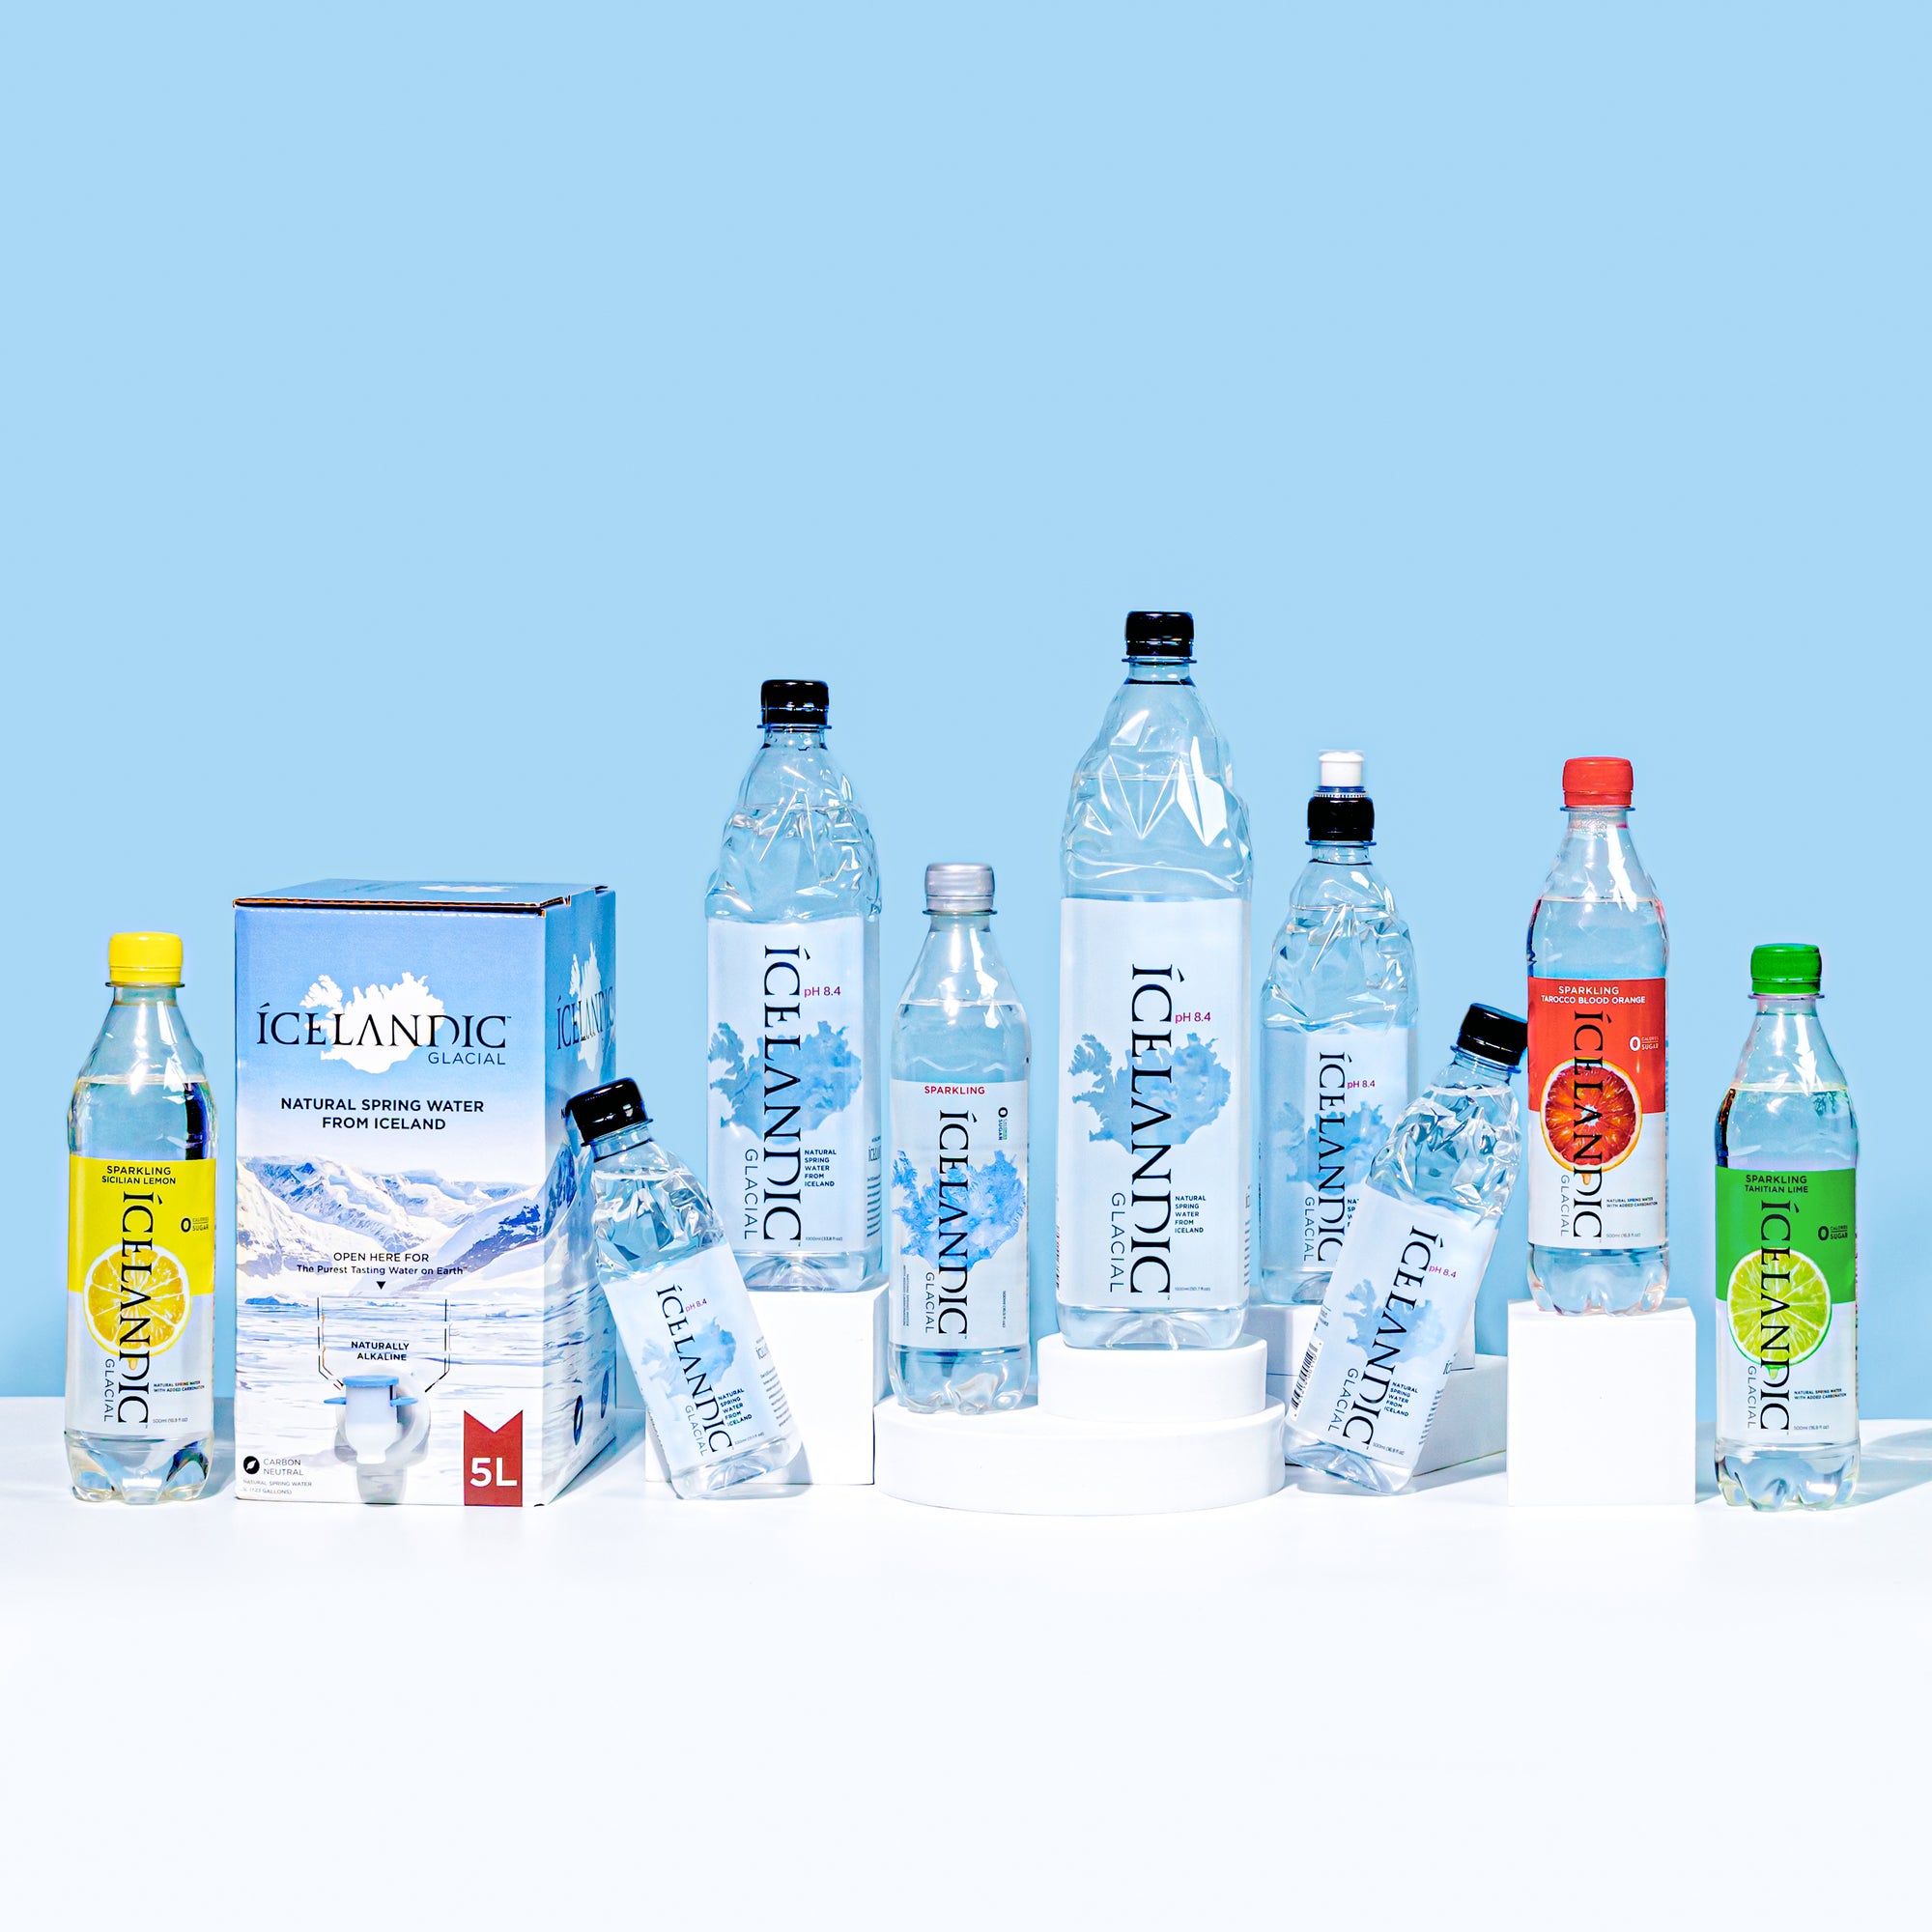 Icelandic Glacial premium water launches in glass bottles, 2016-09-15